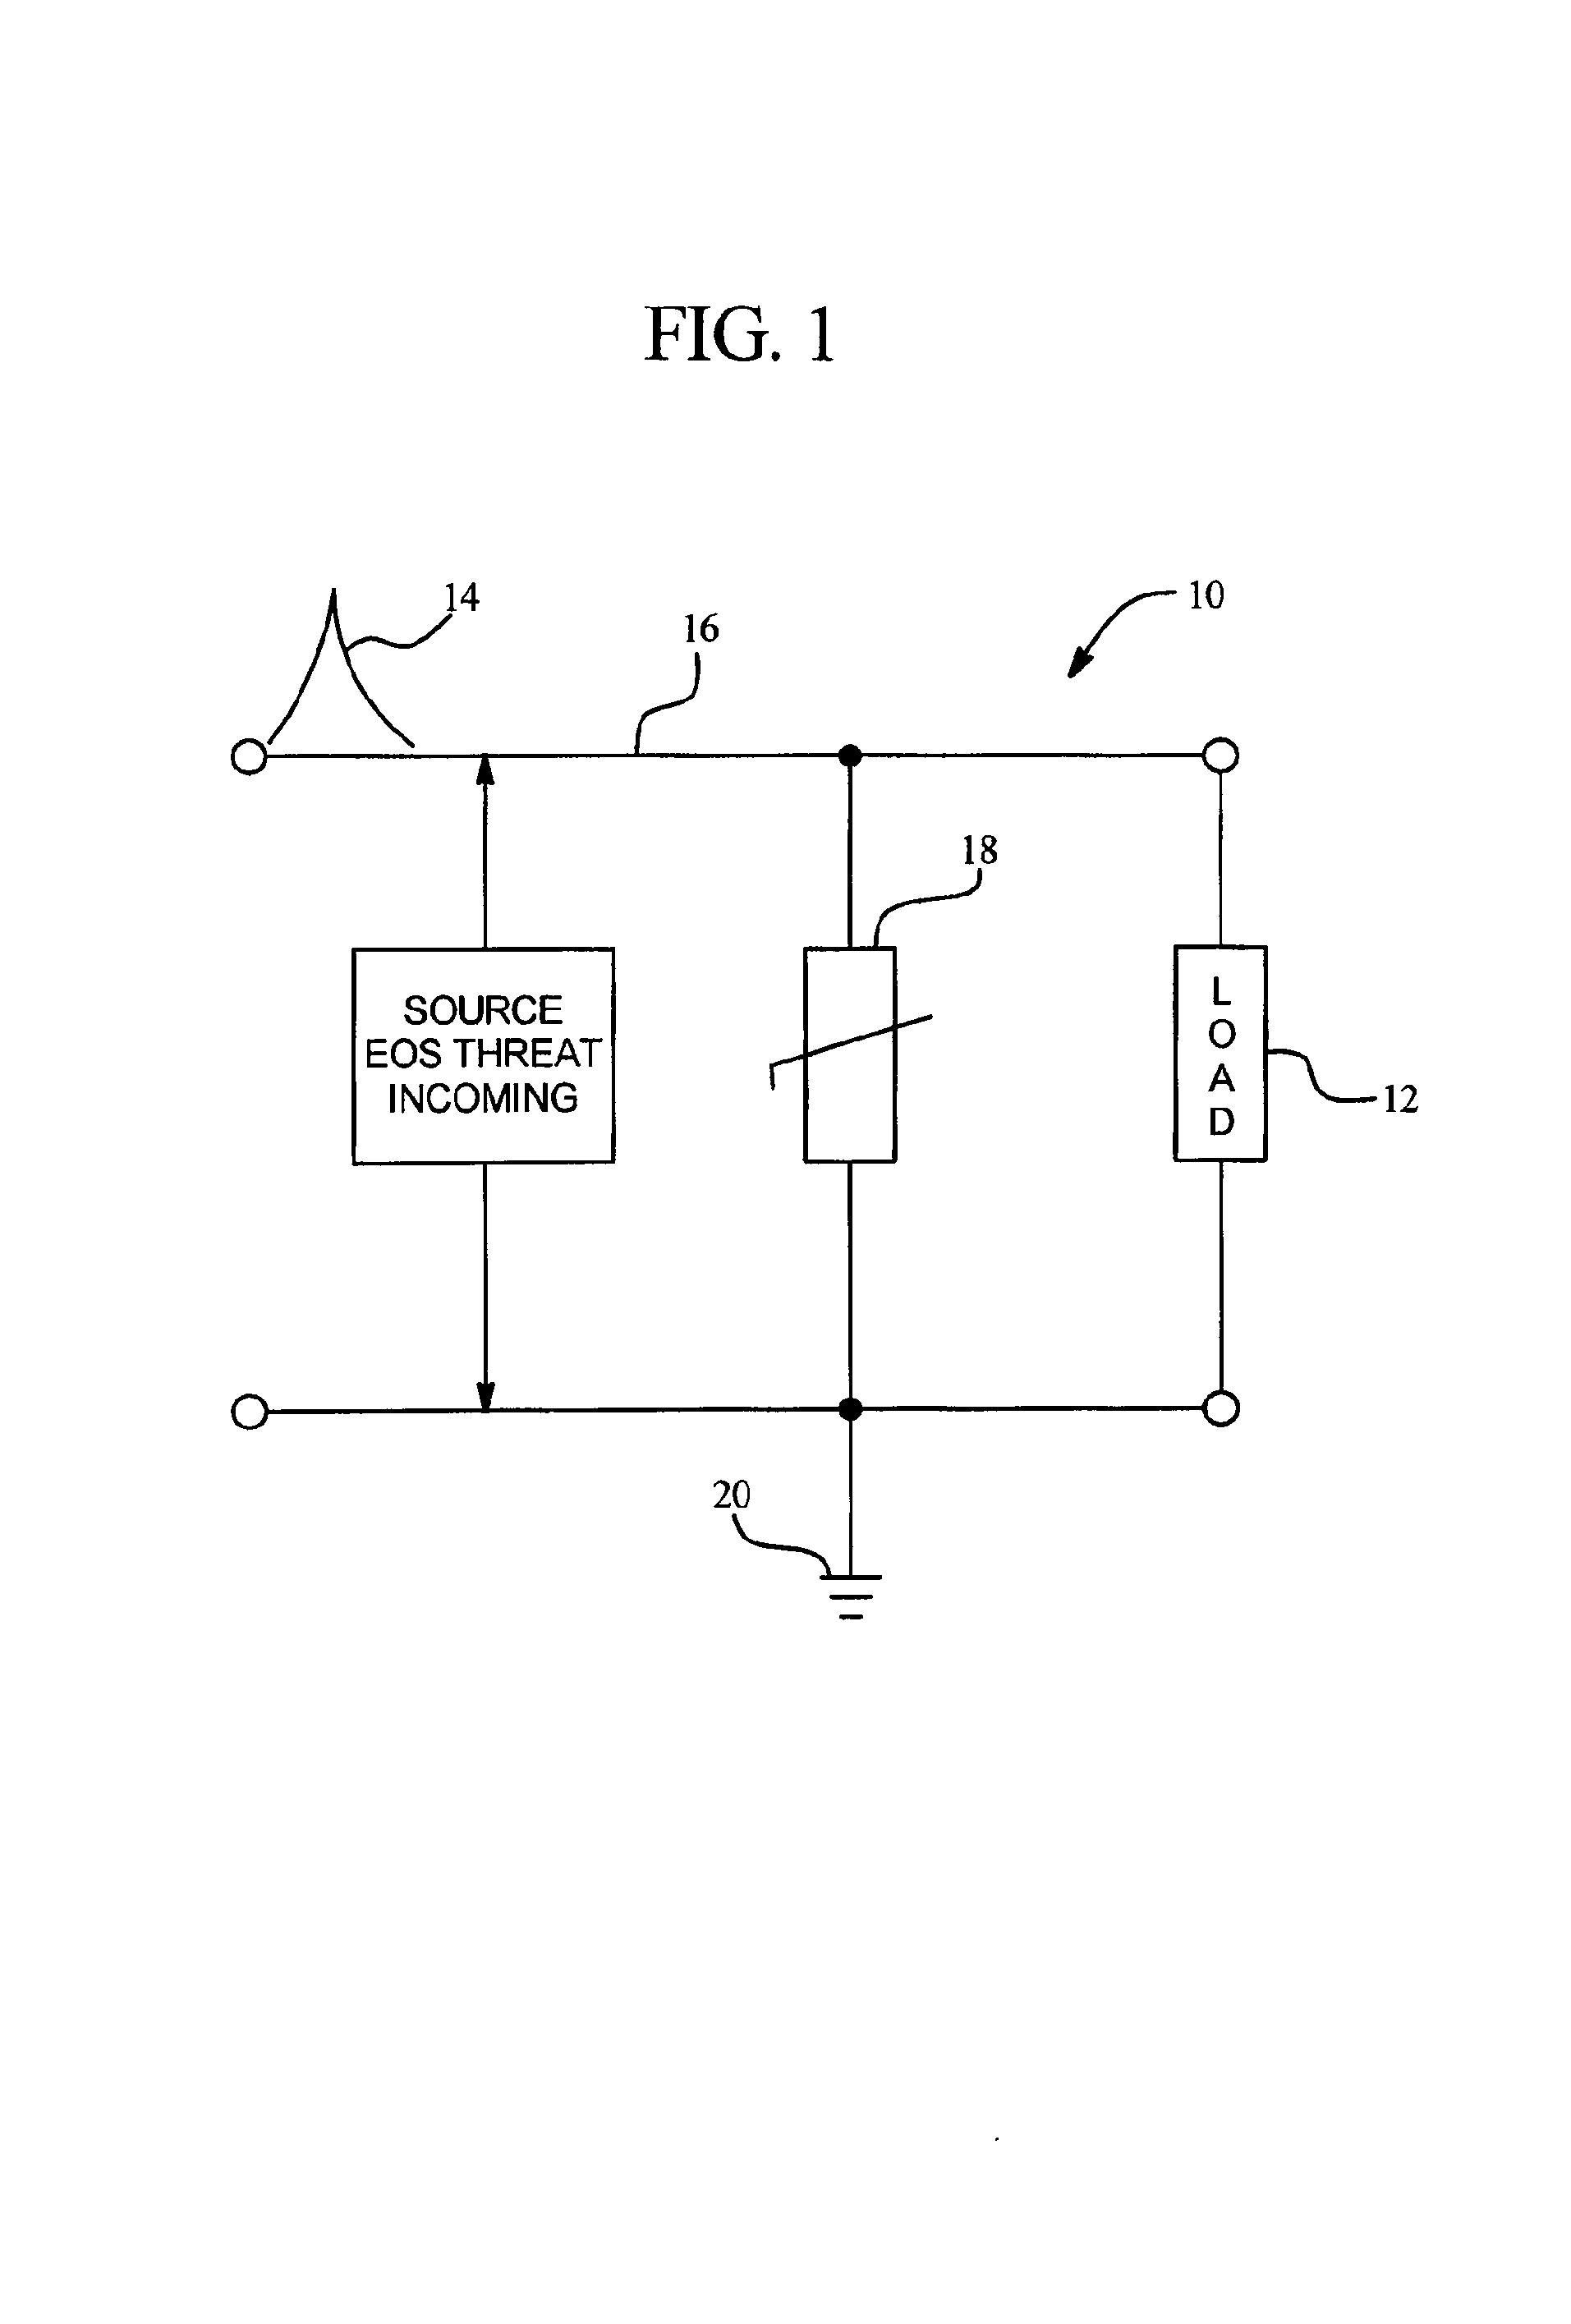 Voltage variable material for direct application and devices employing same